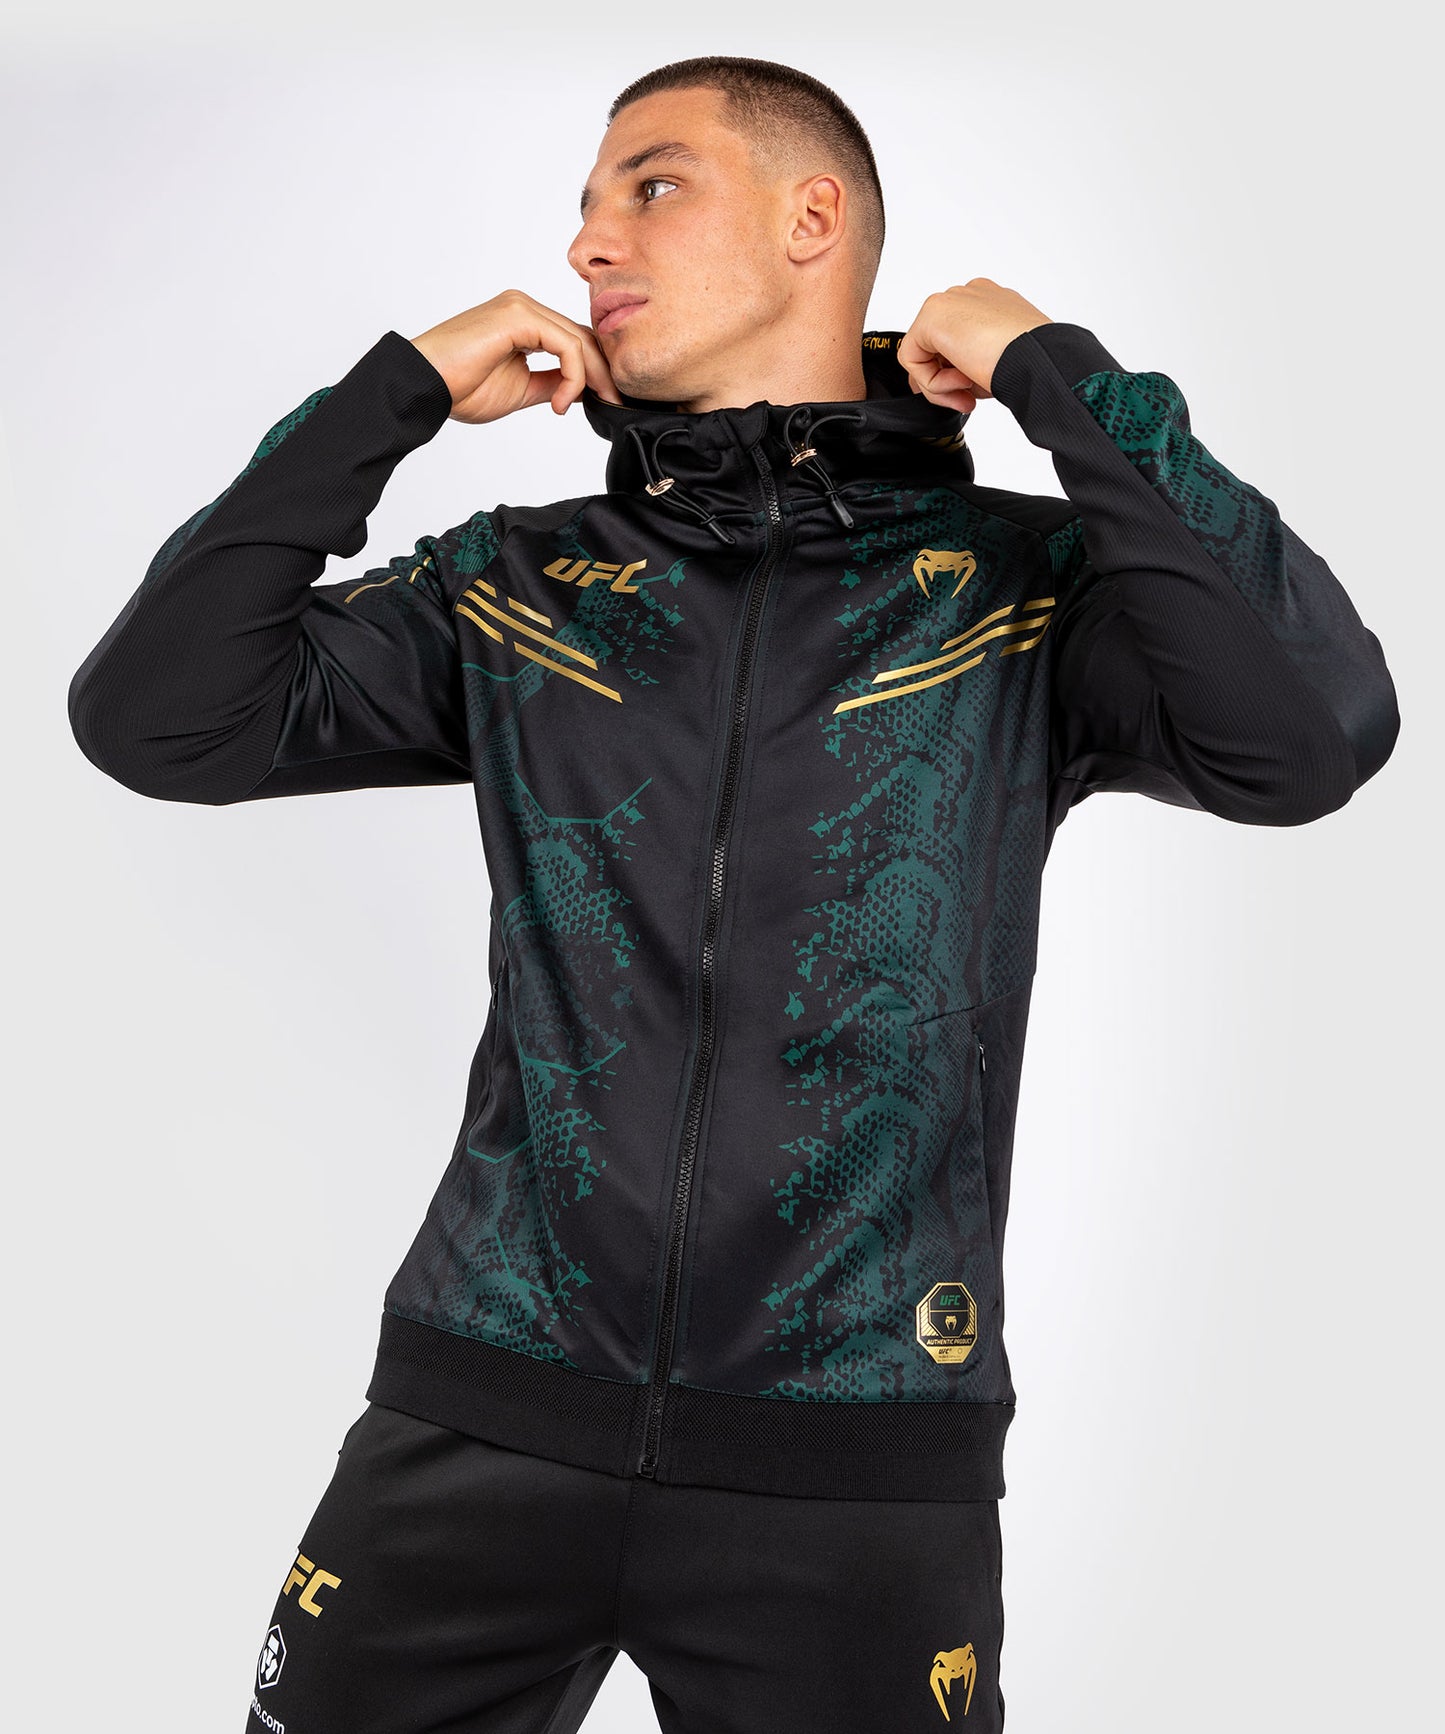 UFC Adrenaline by Venum Personalized Authentic Fight Night Men’s Walkout Hoodie - Emerald Edition - Green/Black/Gold